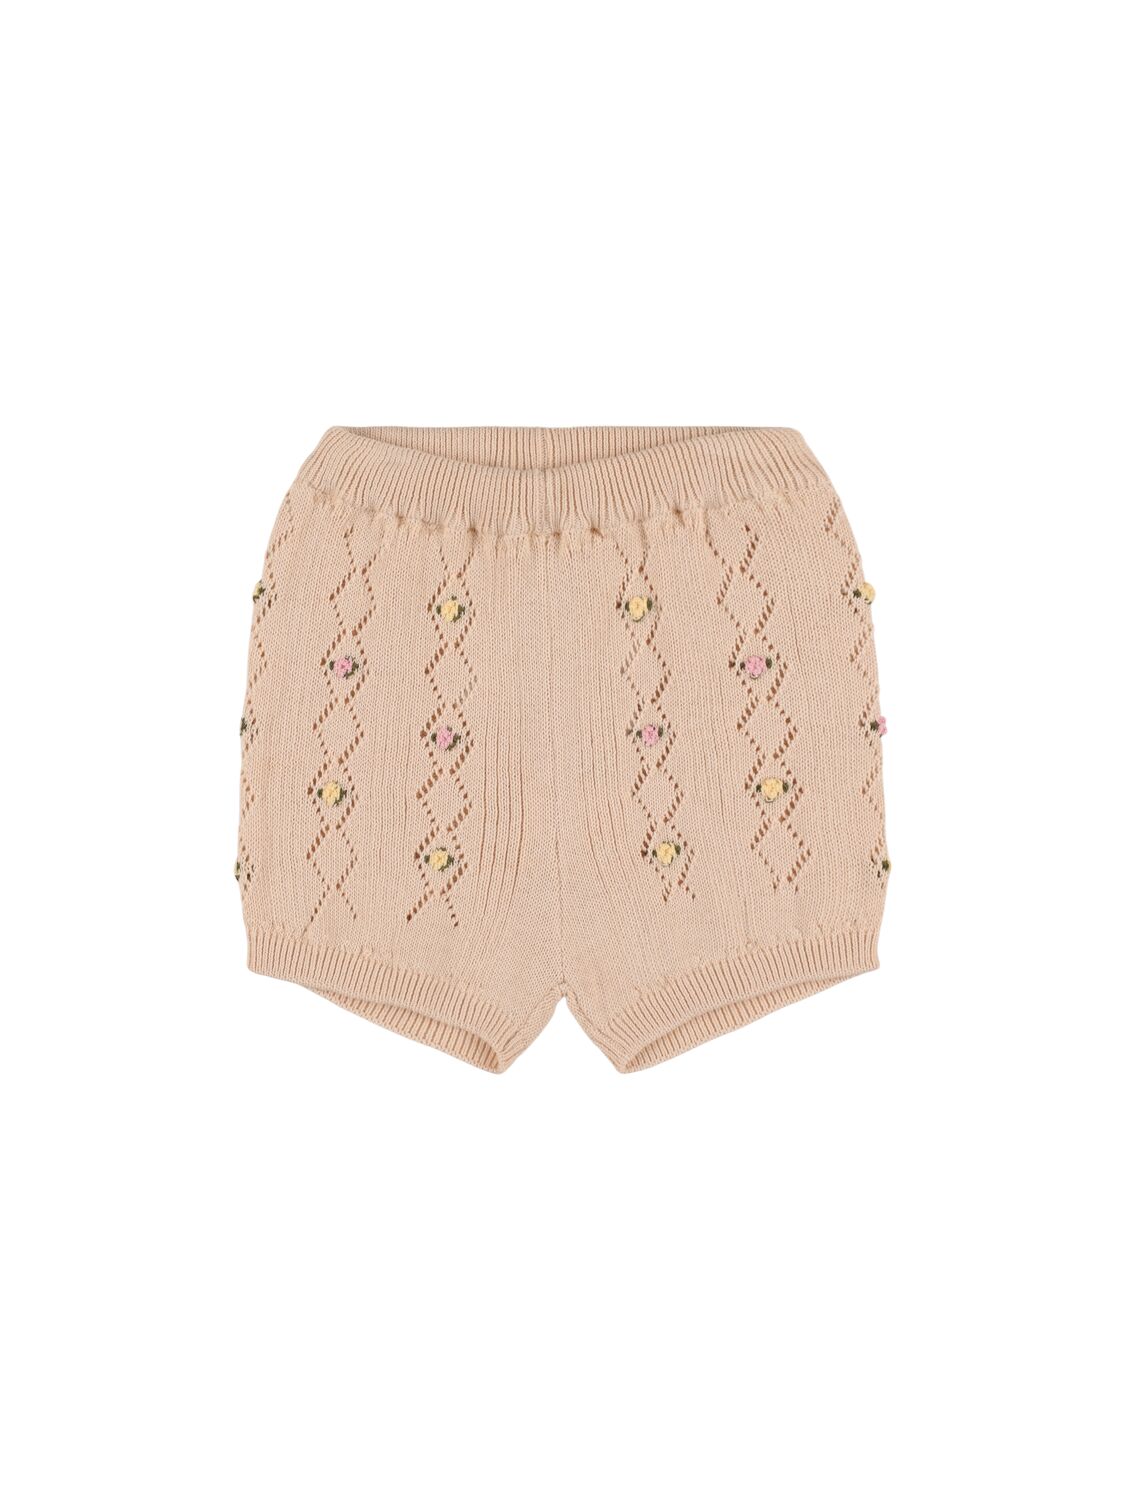 The New Society Kids' Organic Cotton Knit Shorts In Beige